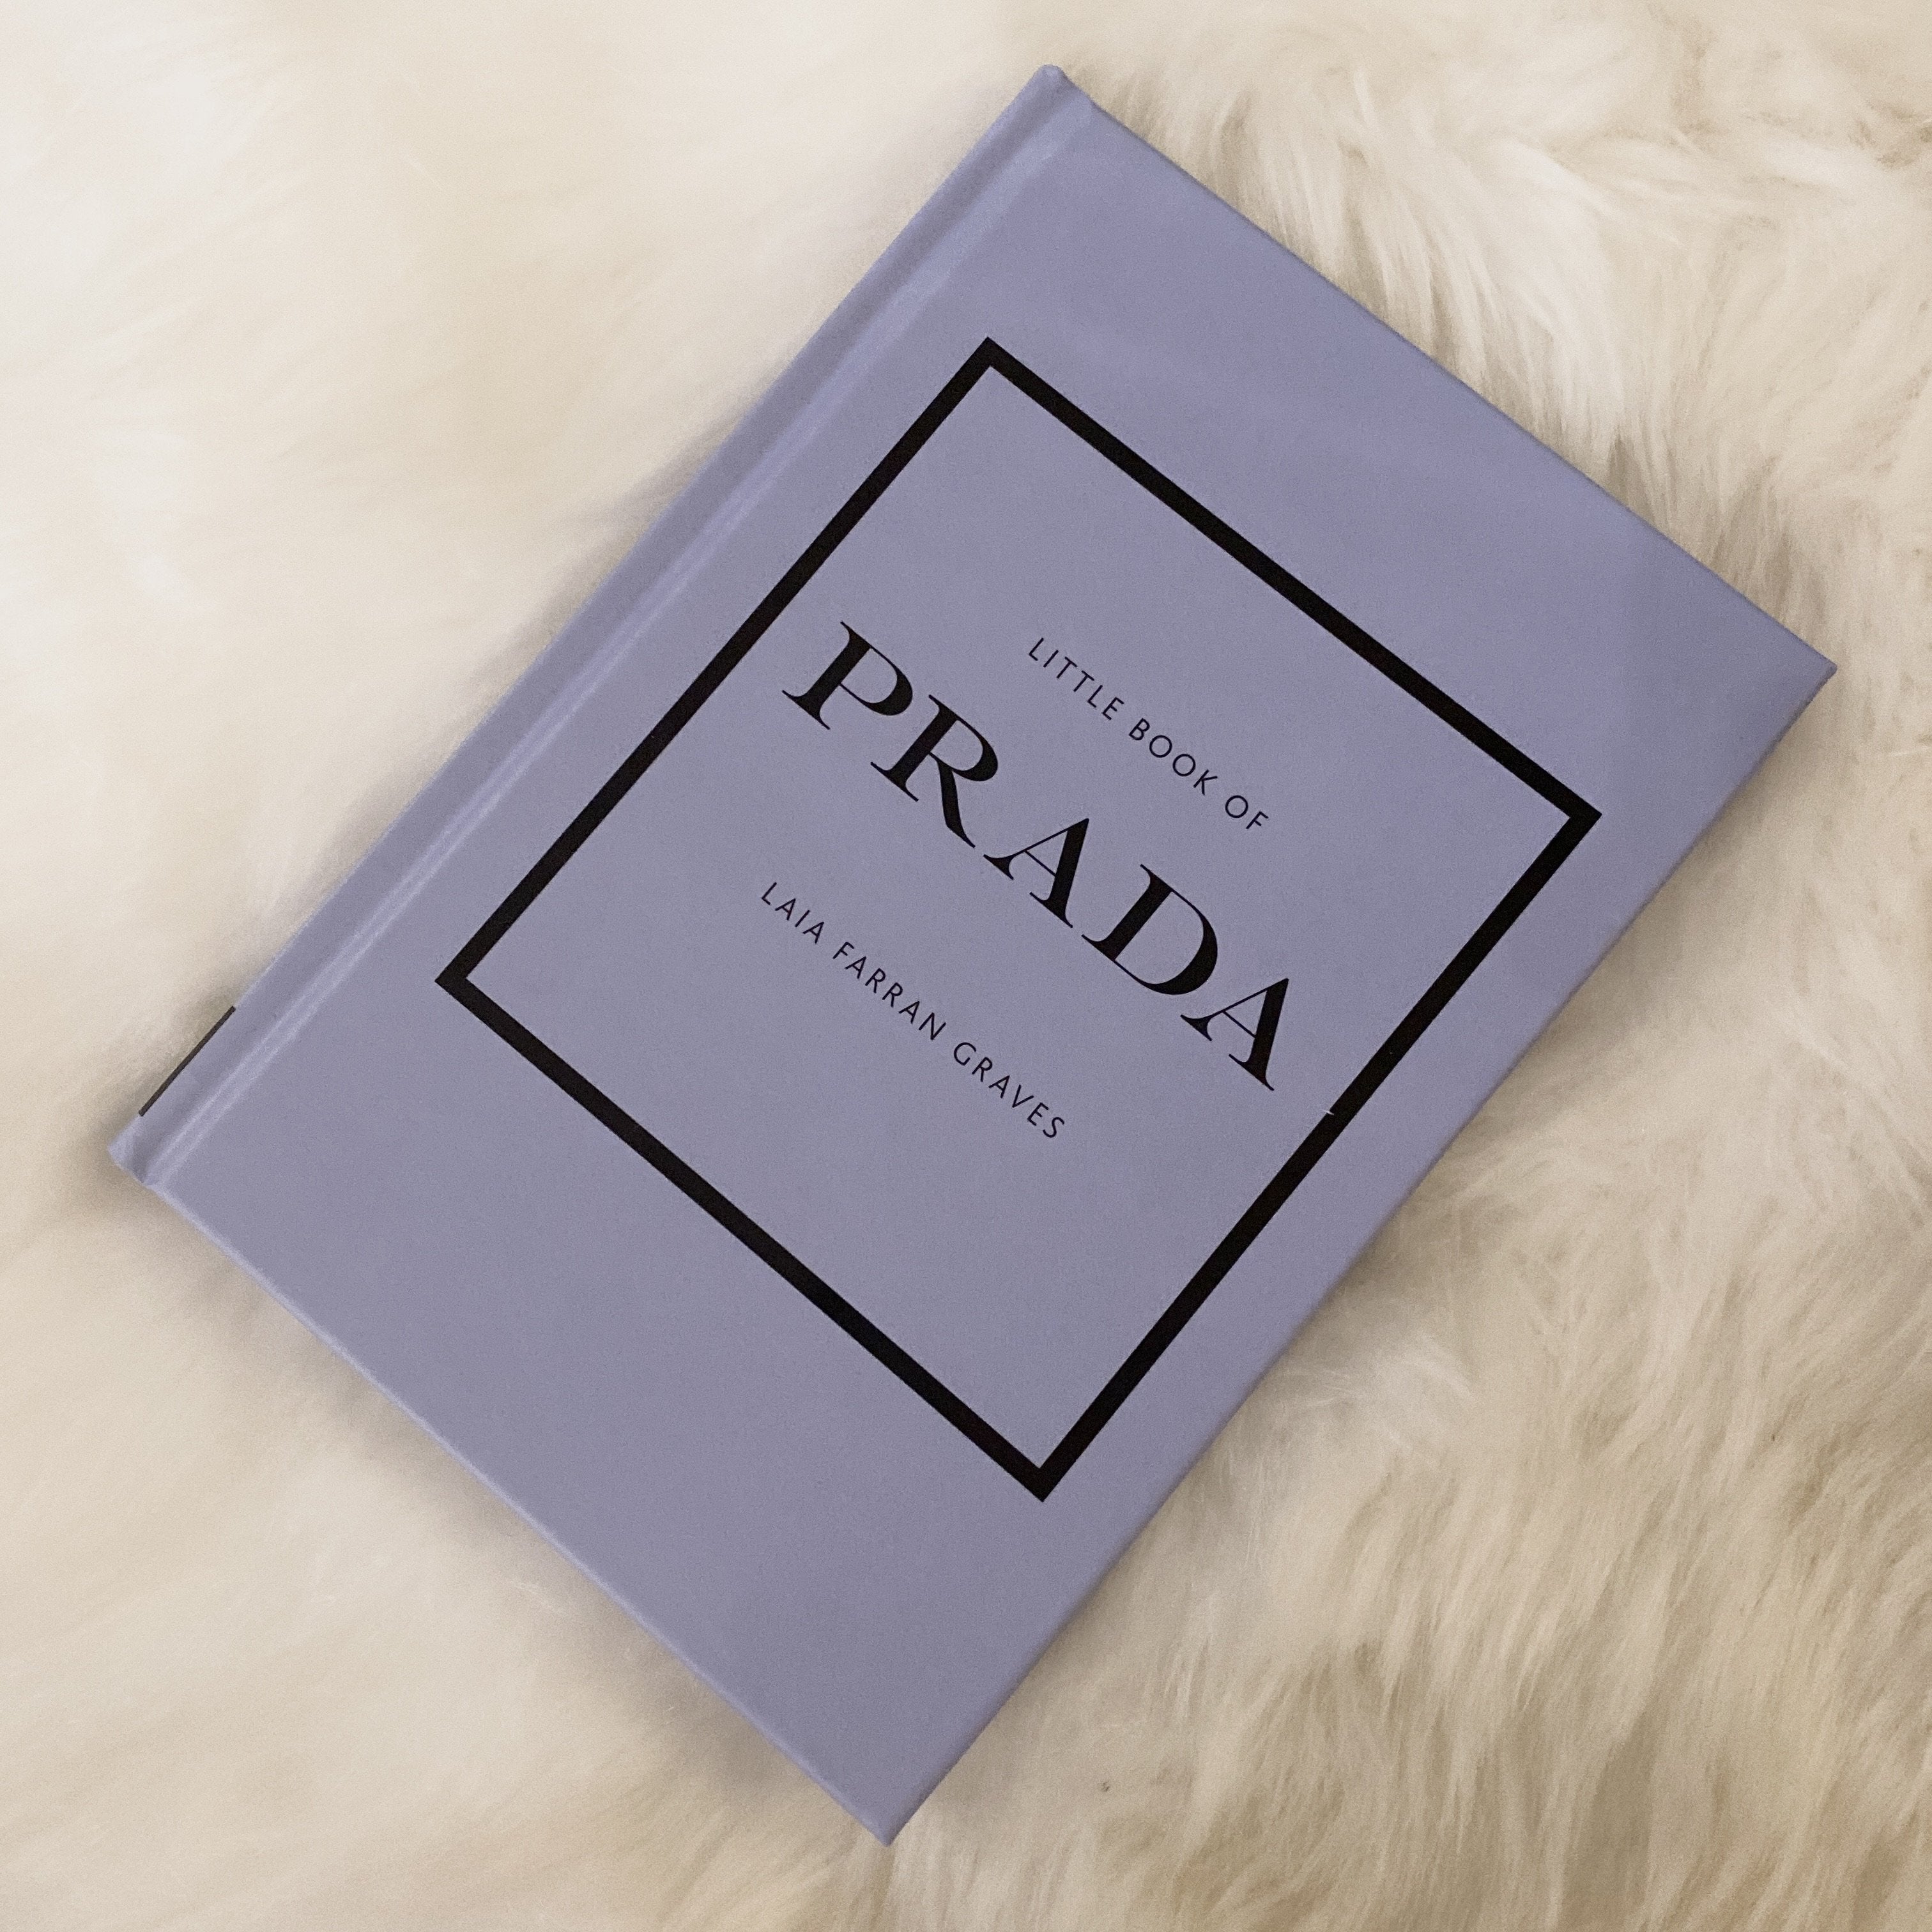 Little book of PRADA, DIOR, VALENTINO by GRAVES and HOMER Fashion Coffee  Table Books 